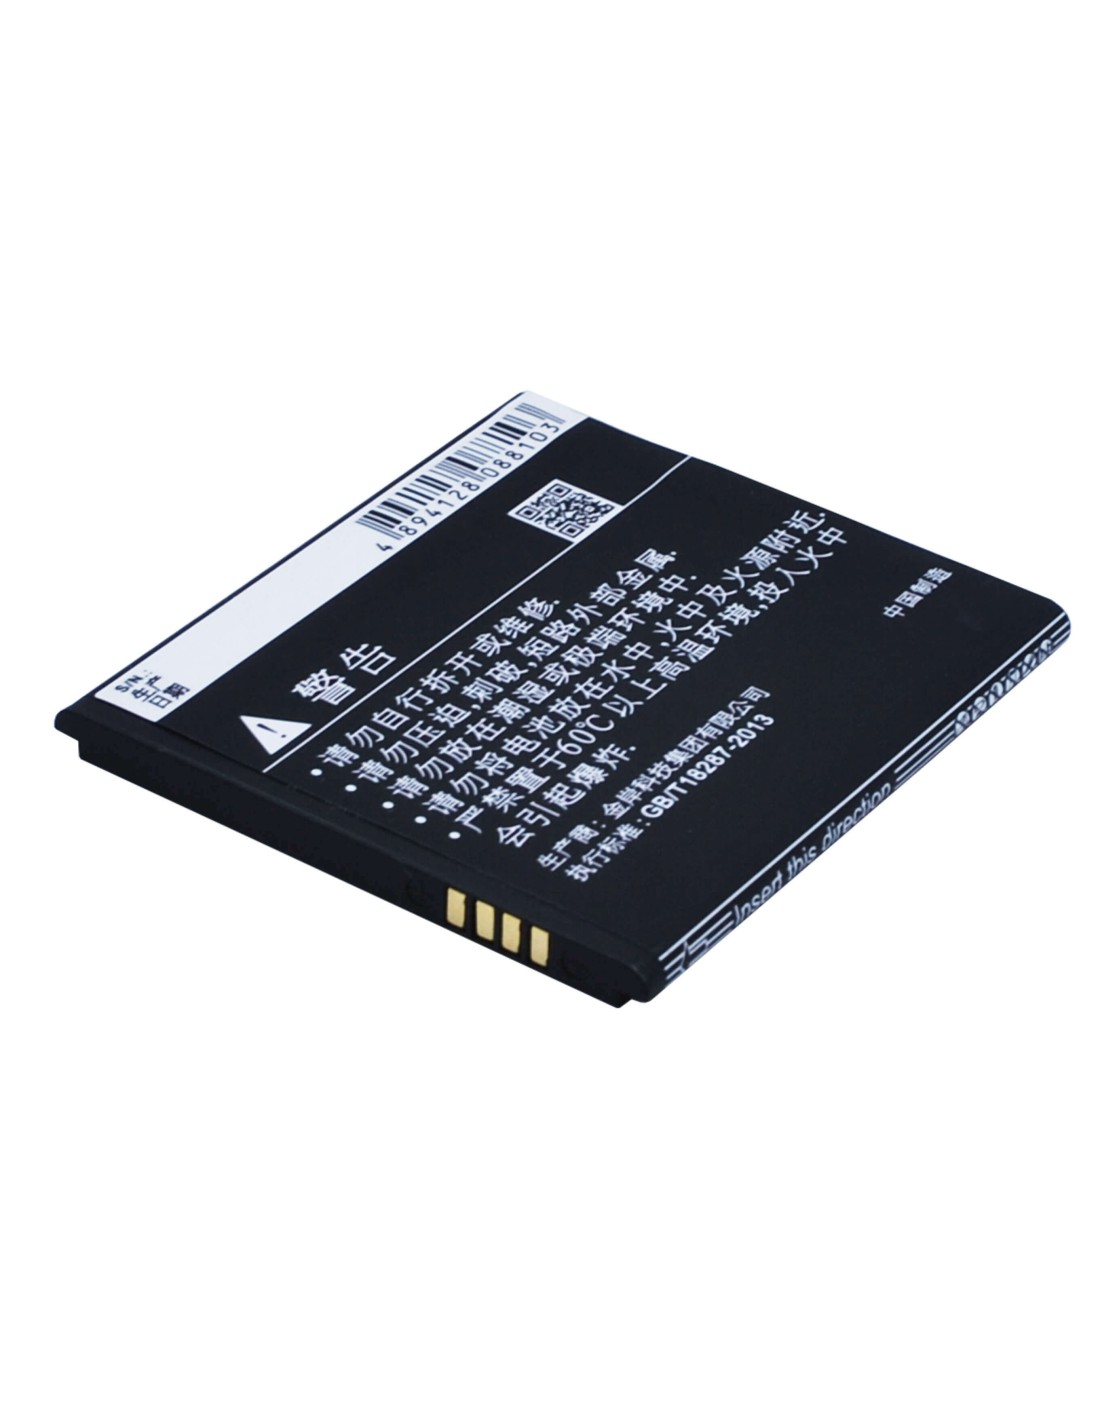 Battery for Coolpad 8950 3.7V, 1500mAh - 5.55Wh